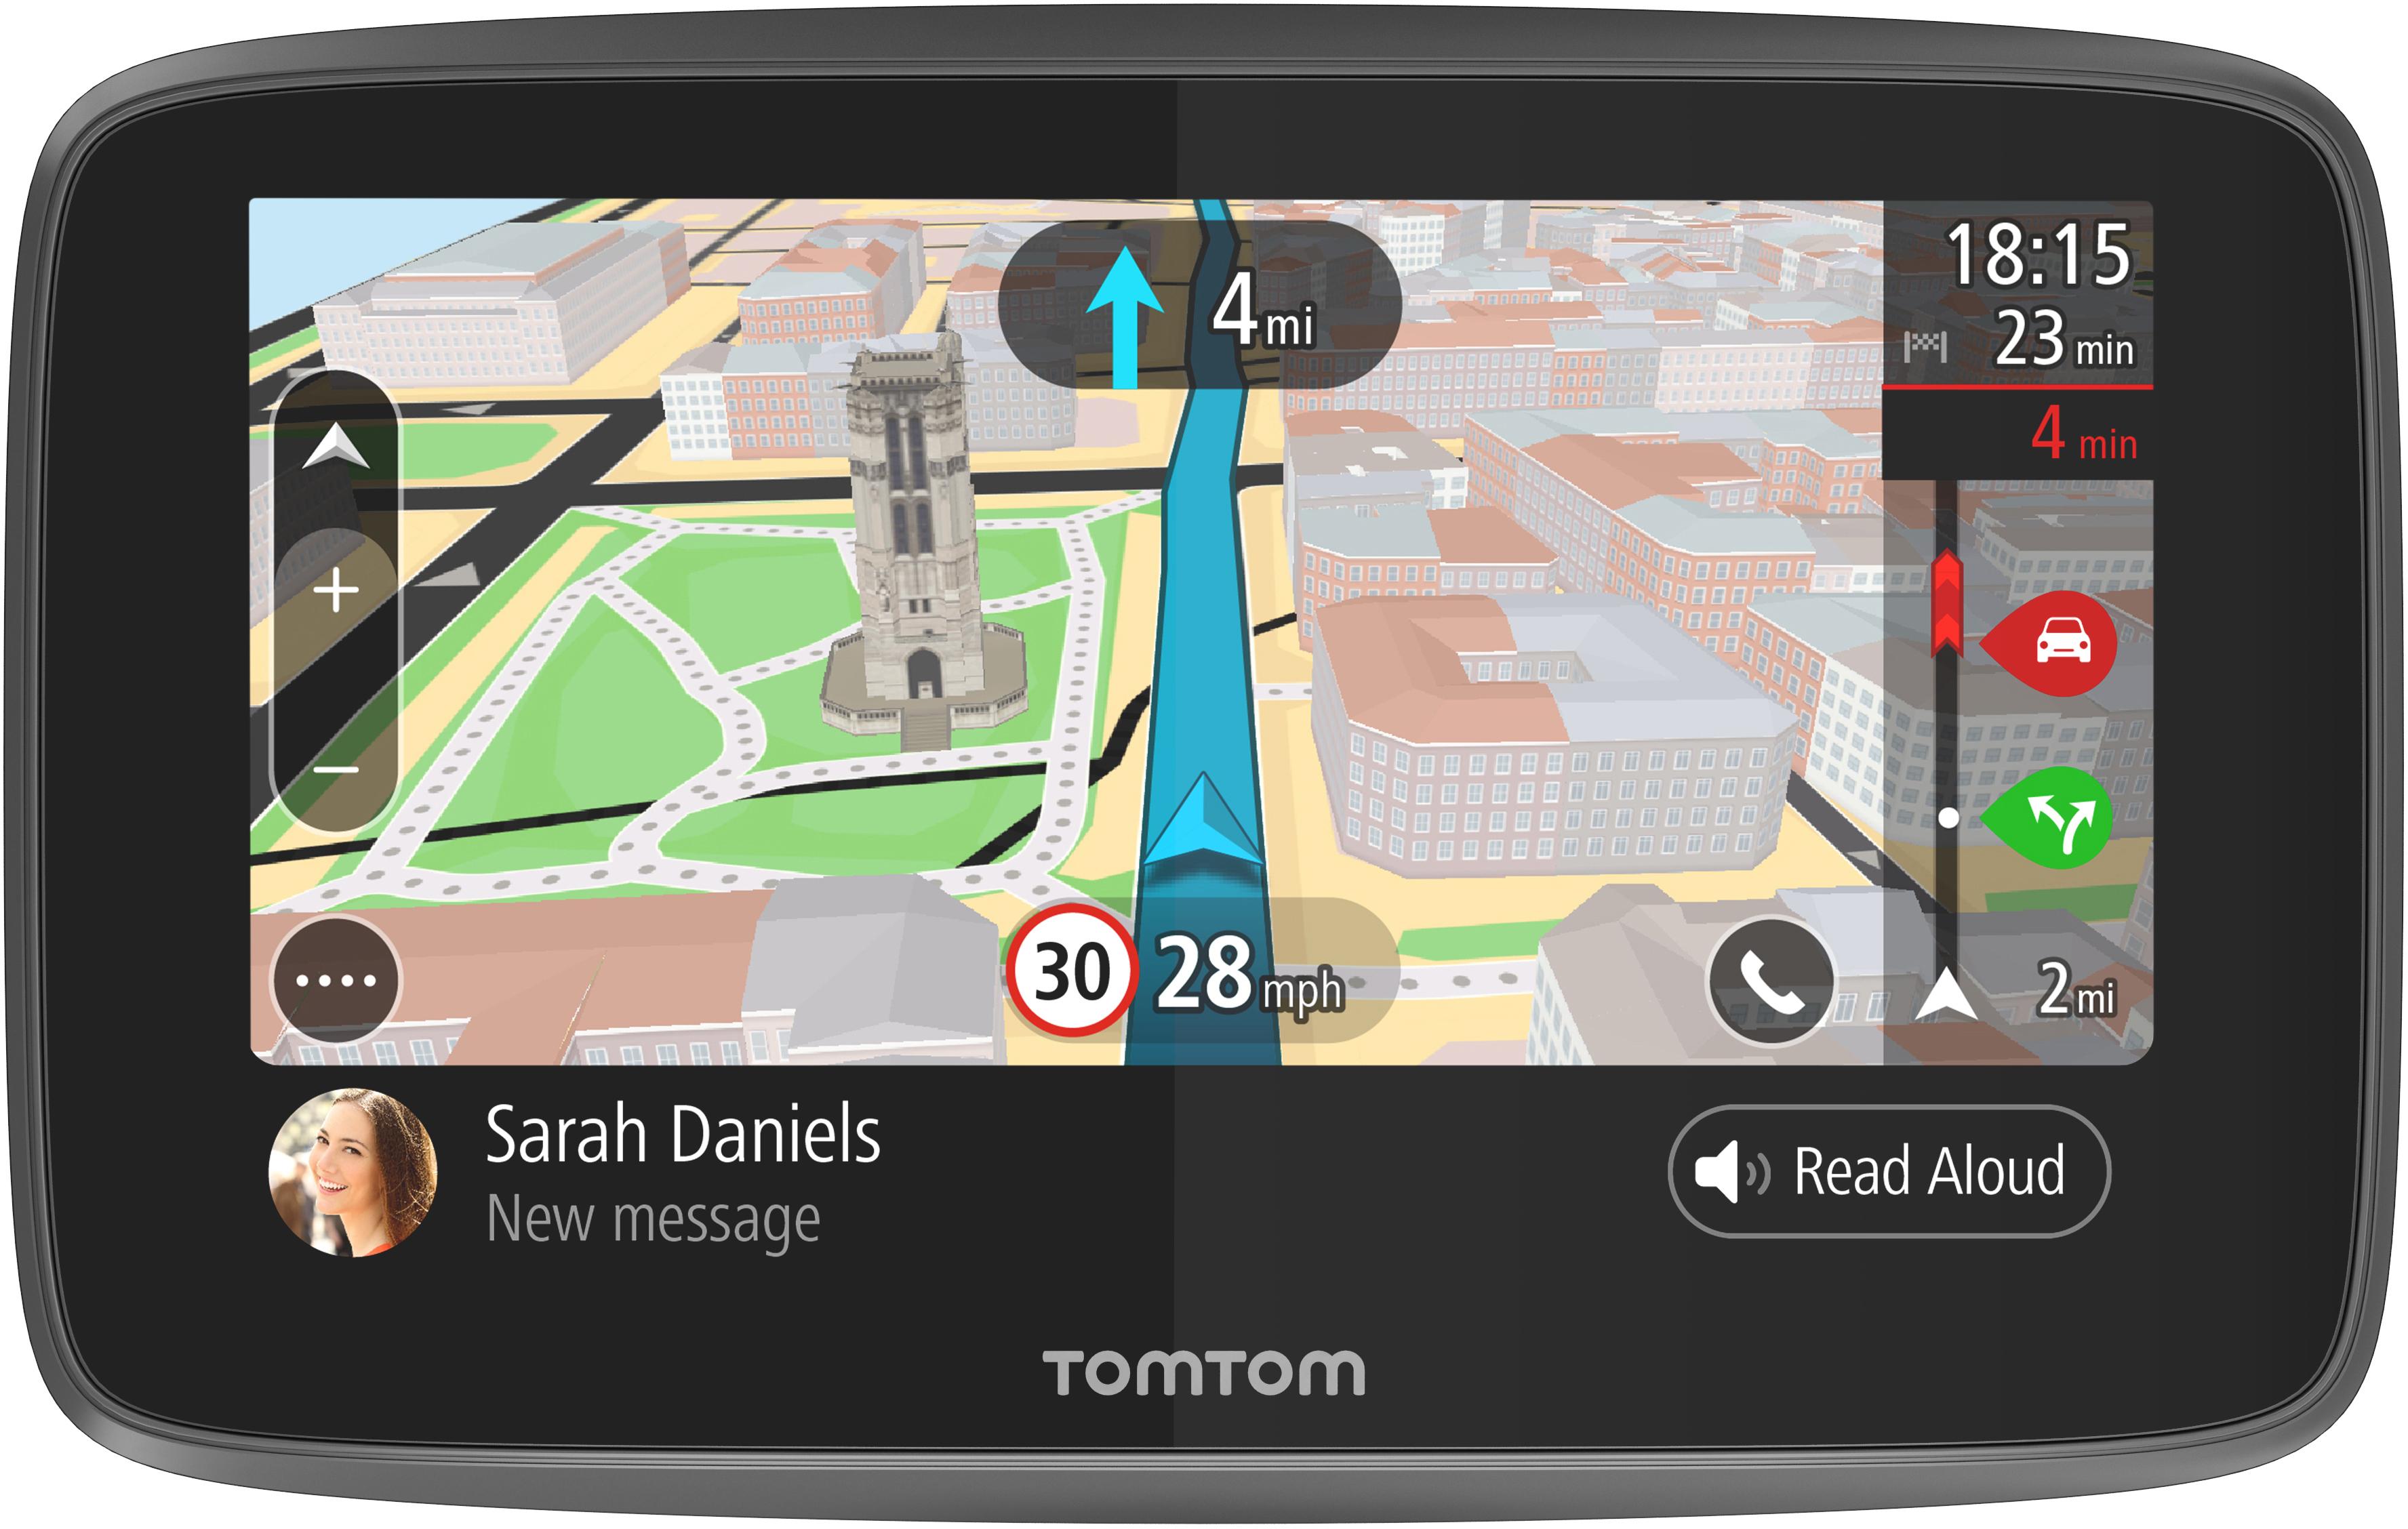 Refurbished Tomtom Go 6200 With Wi-Fi, World Maps And Built In Sim For Tomtom Traffic - Grade A